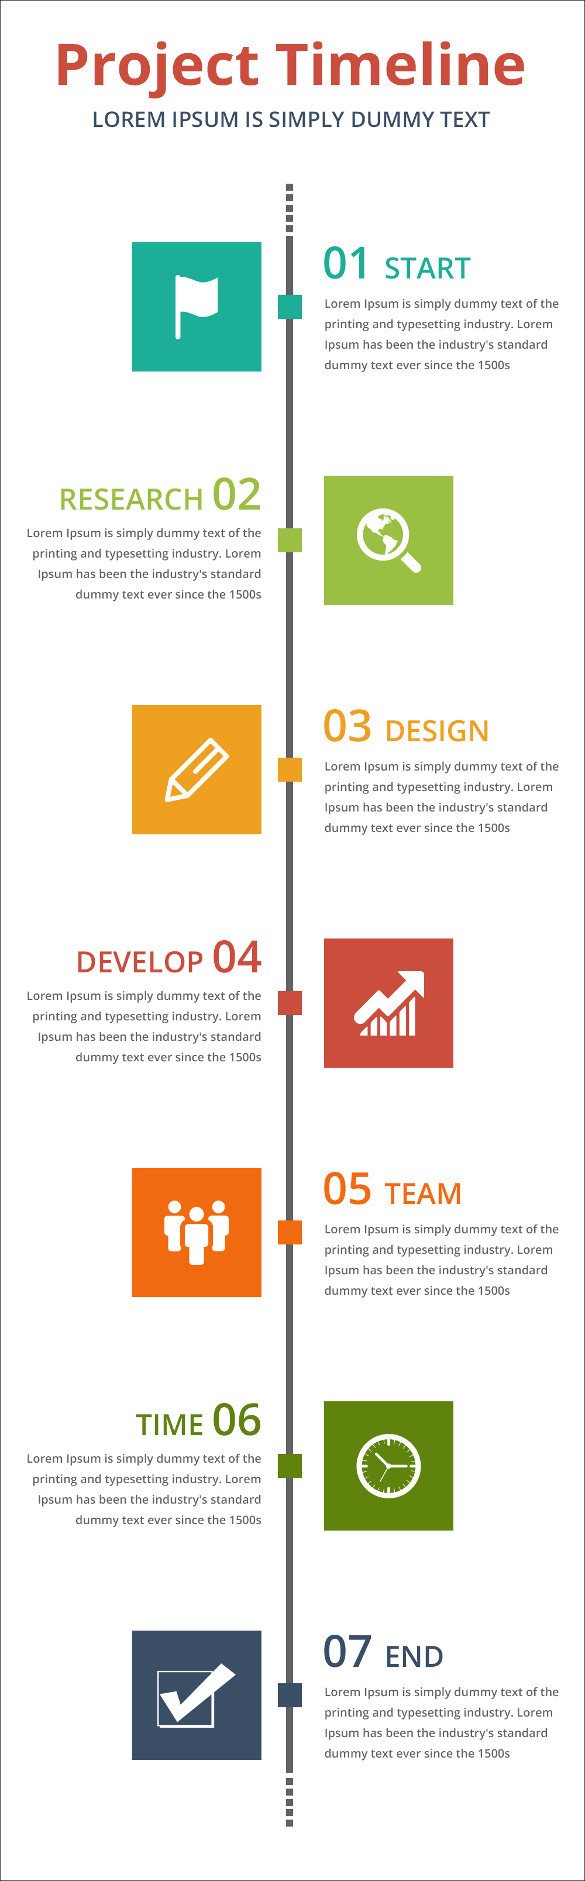 Project Timeline Templates 19 Free Word PPT Format